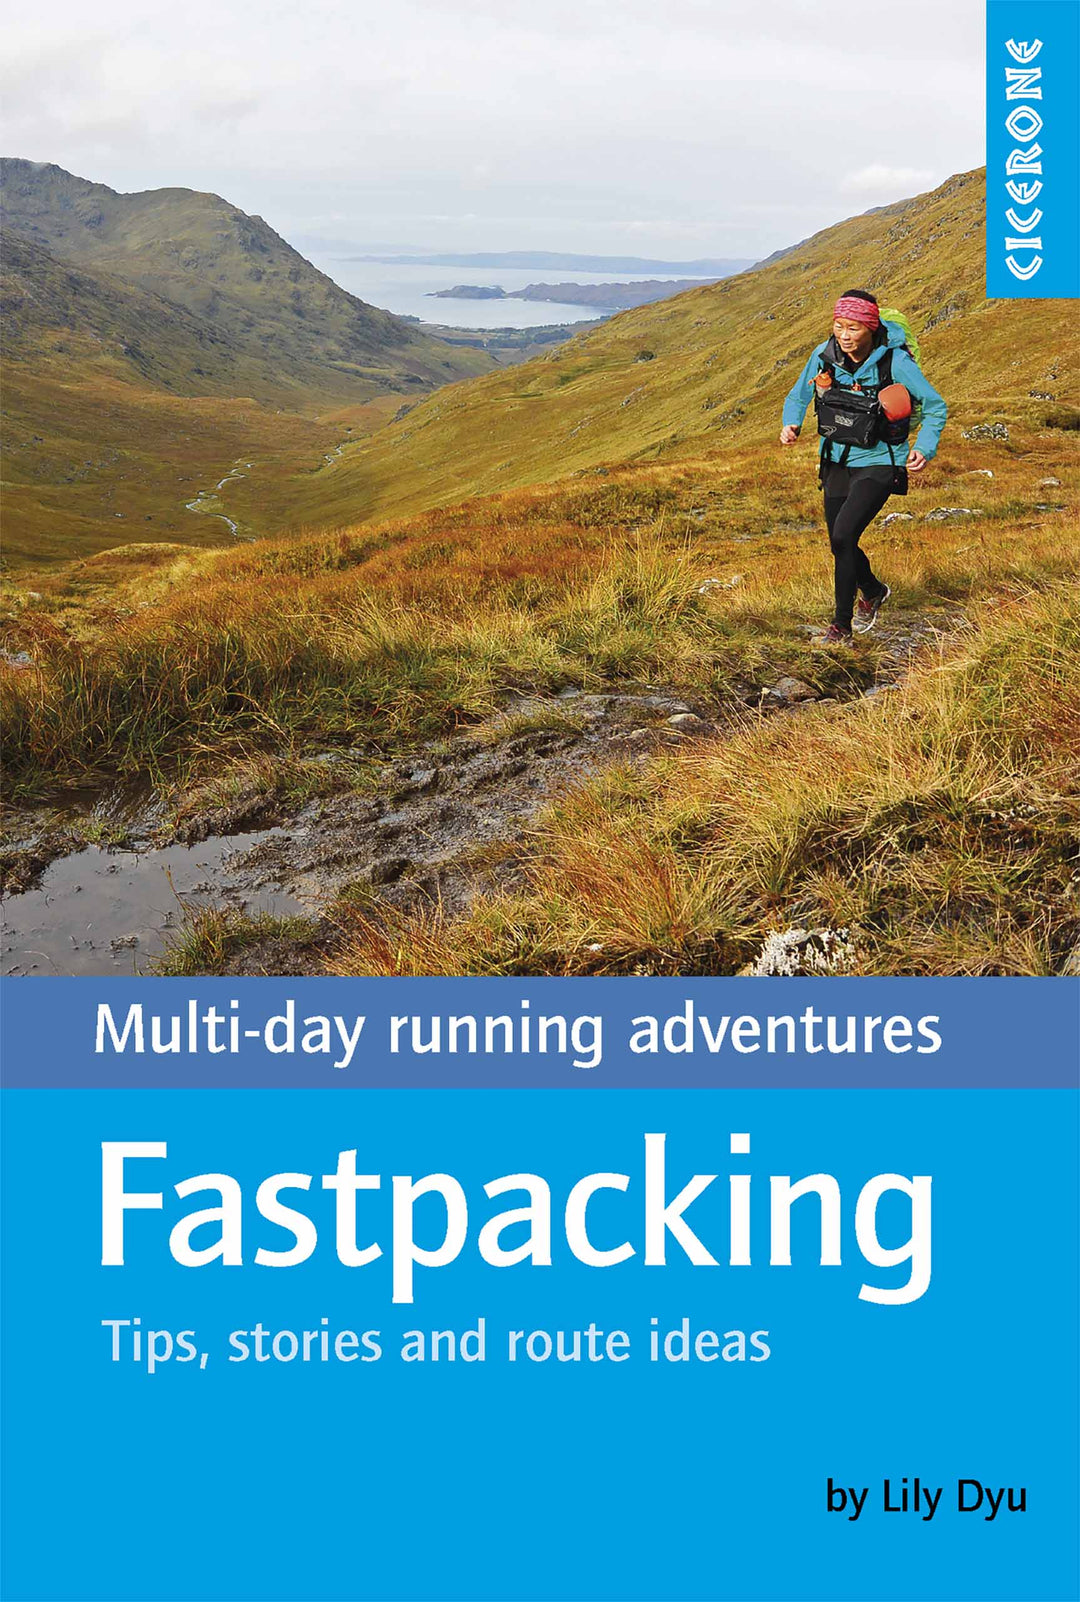 Guide de randonnées (en anglais) - Fastpacking: Multi-Day Running Adventures: Tips, Stories and Route Ideas | Cicerone beau livre Cicerone 